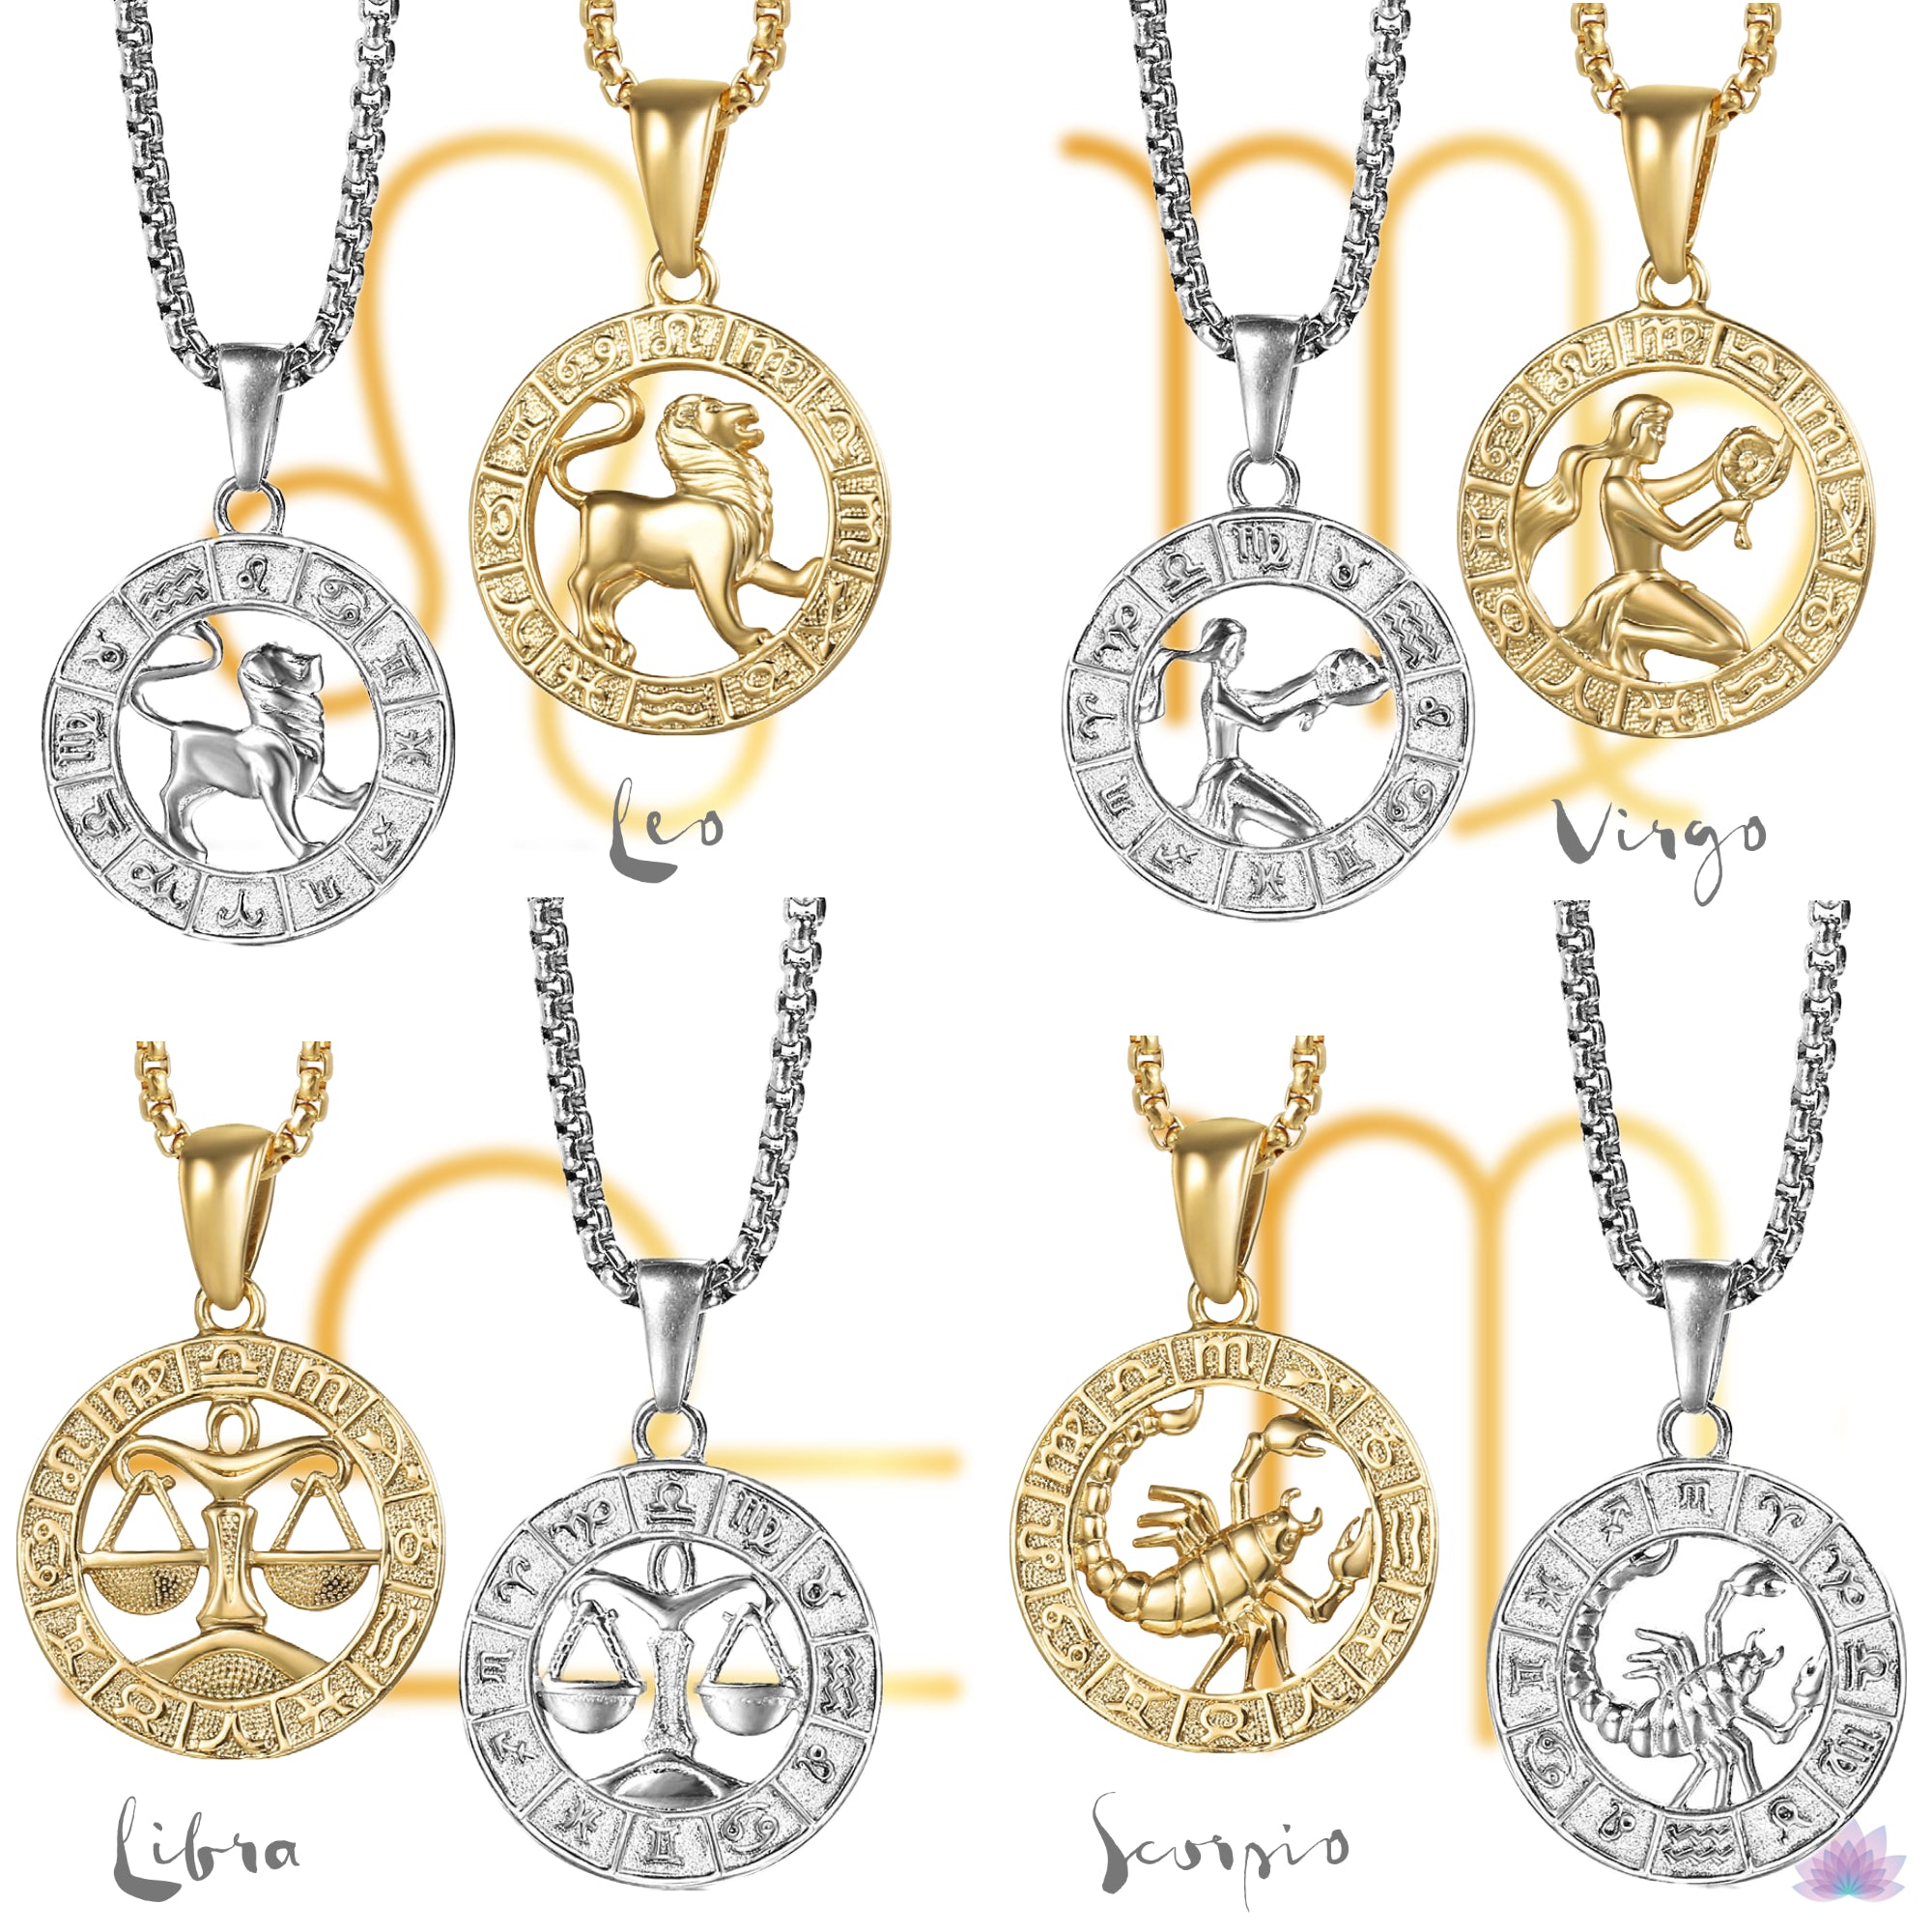 Zodiac Sign Necklace | 12 Constellation Pendants For Spiritual Men & Women | Silver & Gold-Plated Astrology Jewelry